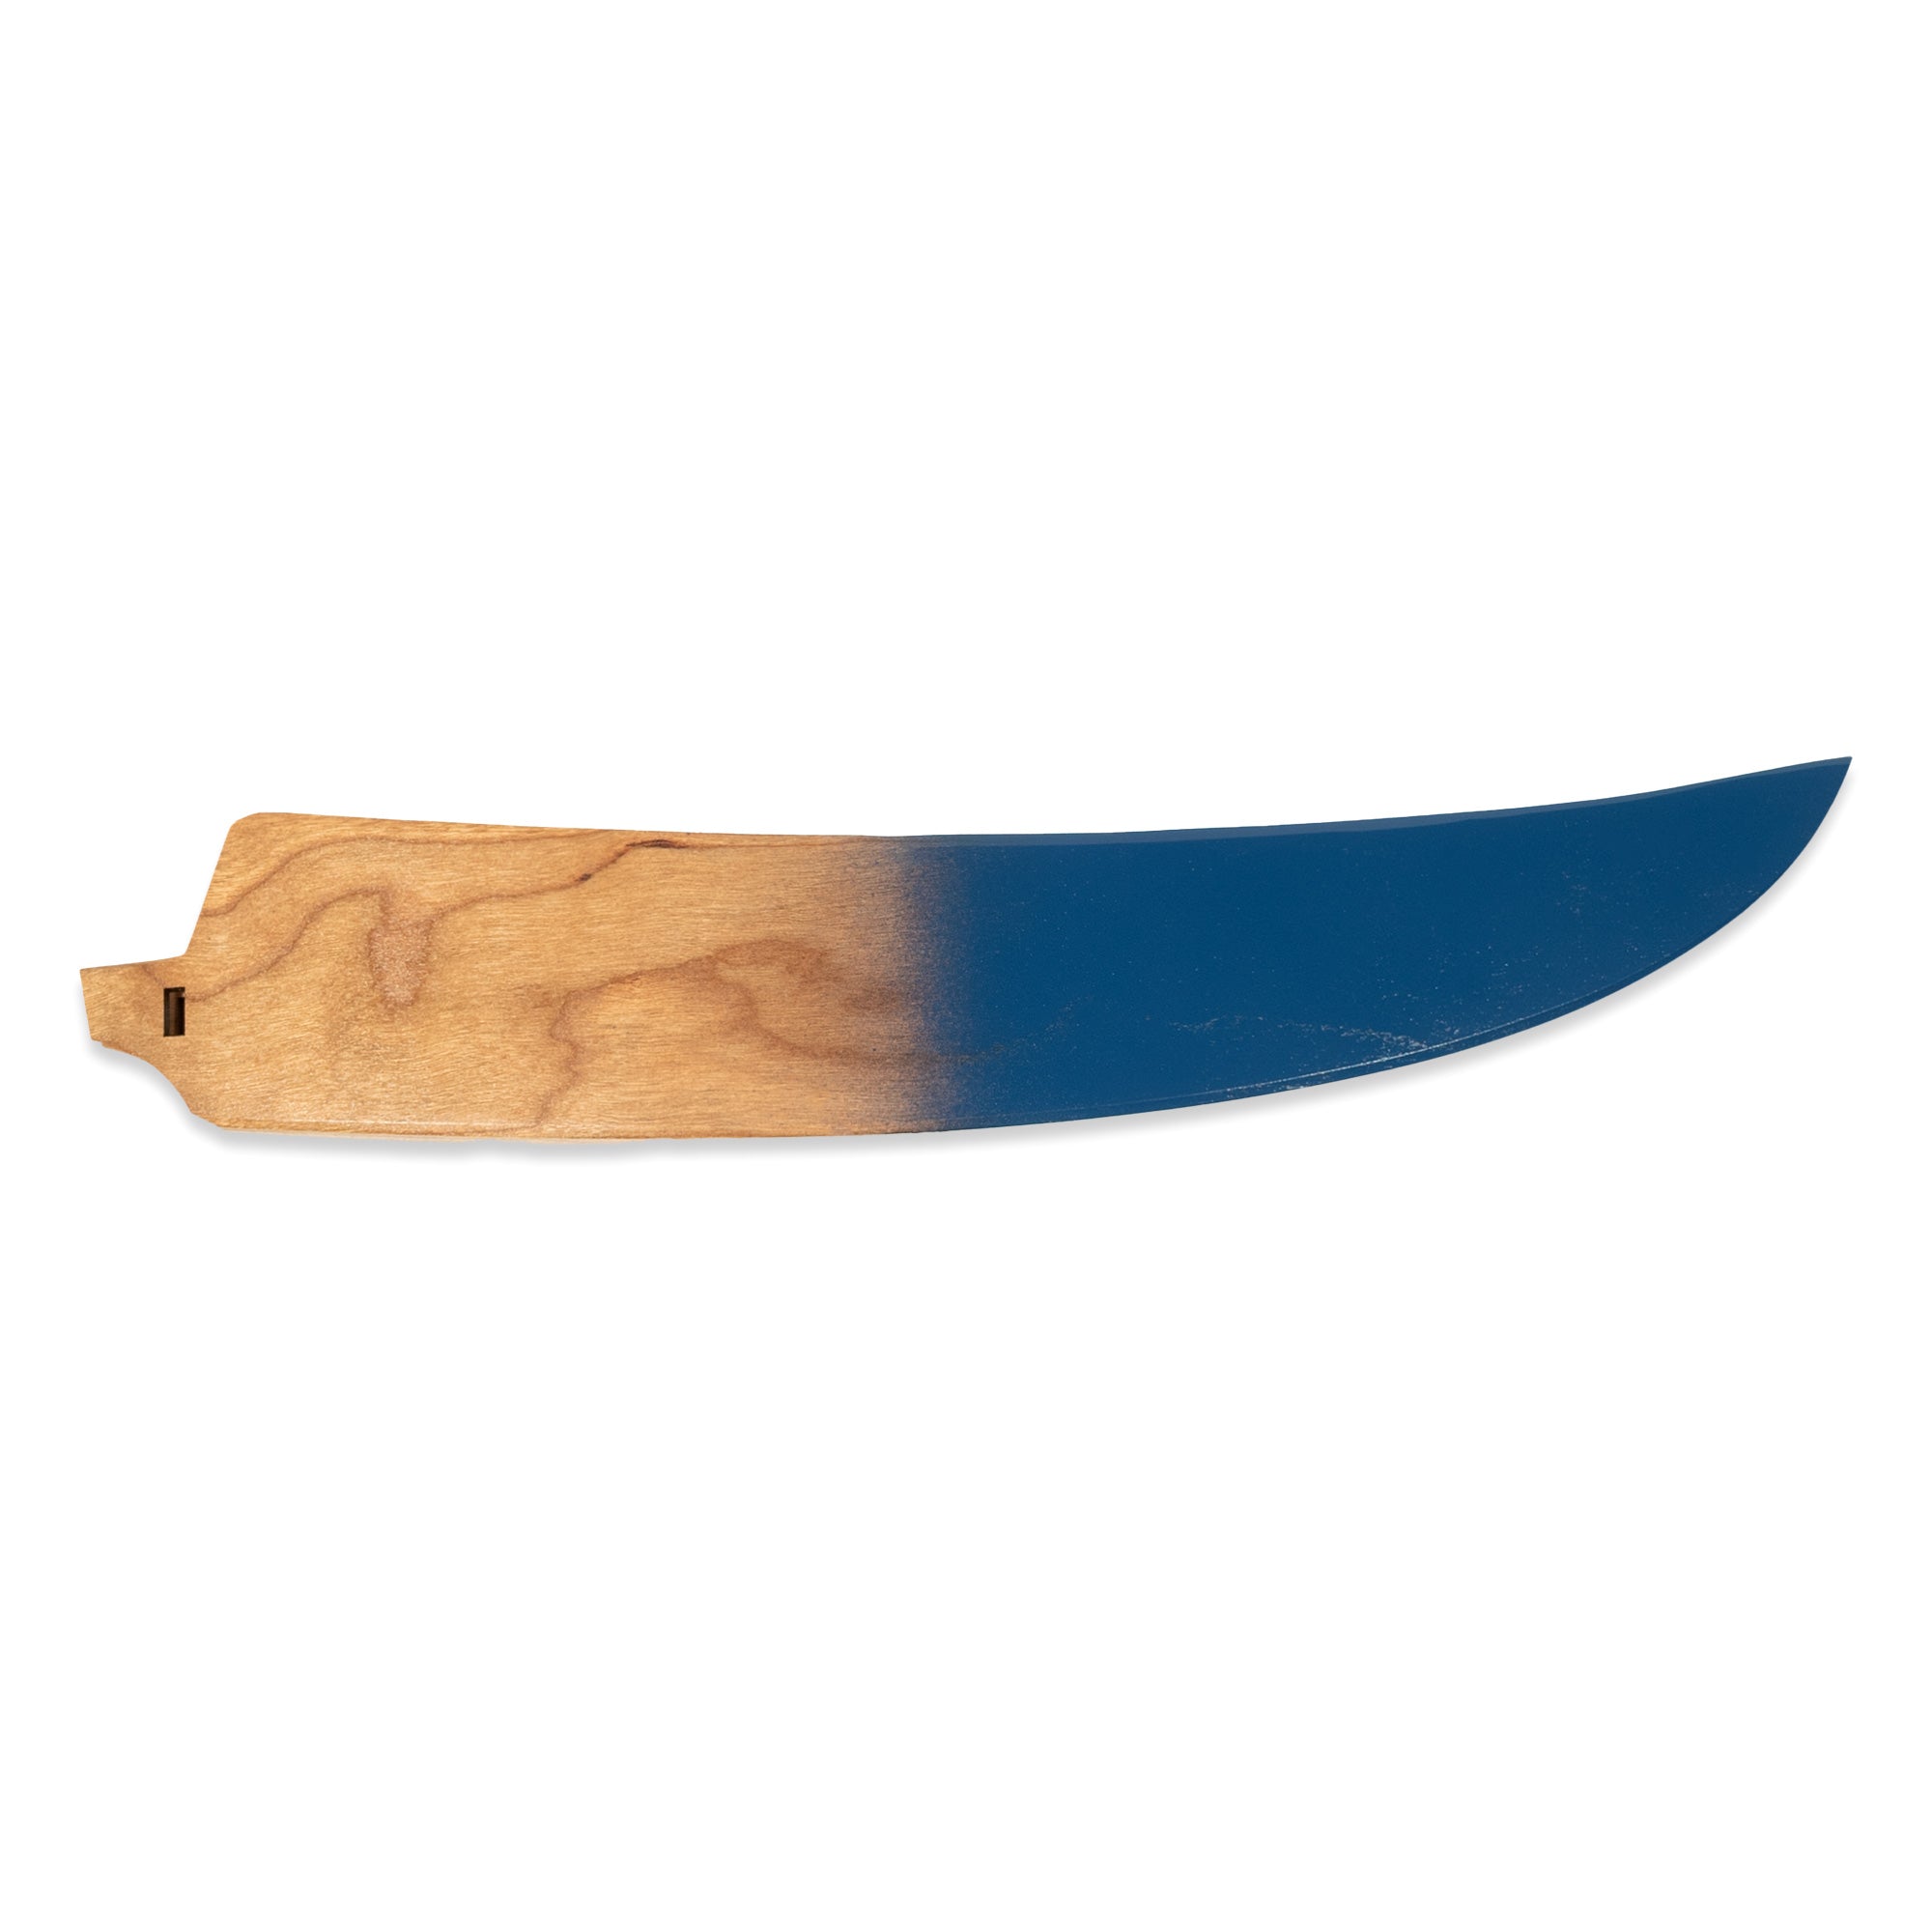 Blue and cherrywood saya knife cover for Town Cutler Tahoe Bliss Scimitar butcher knife